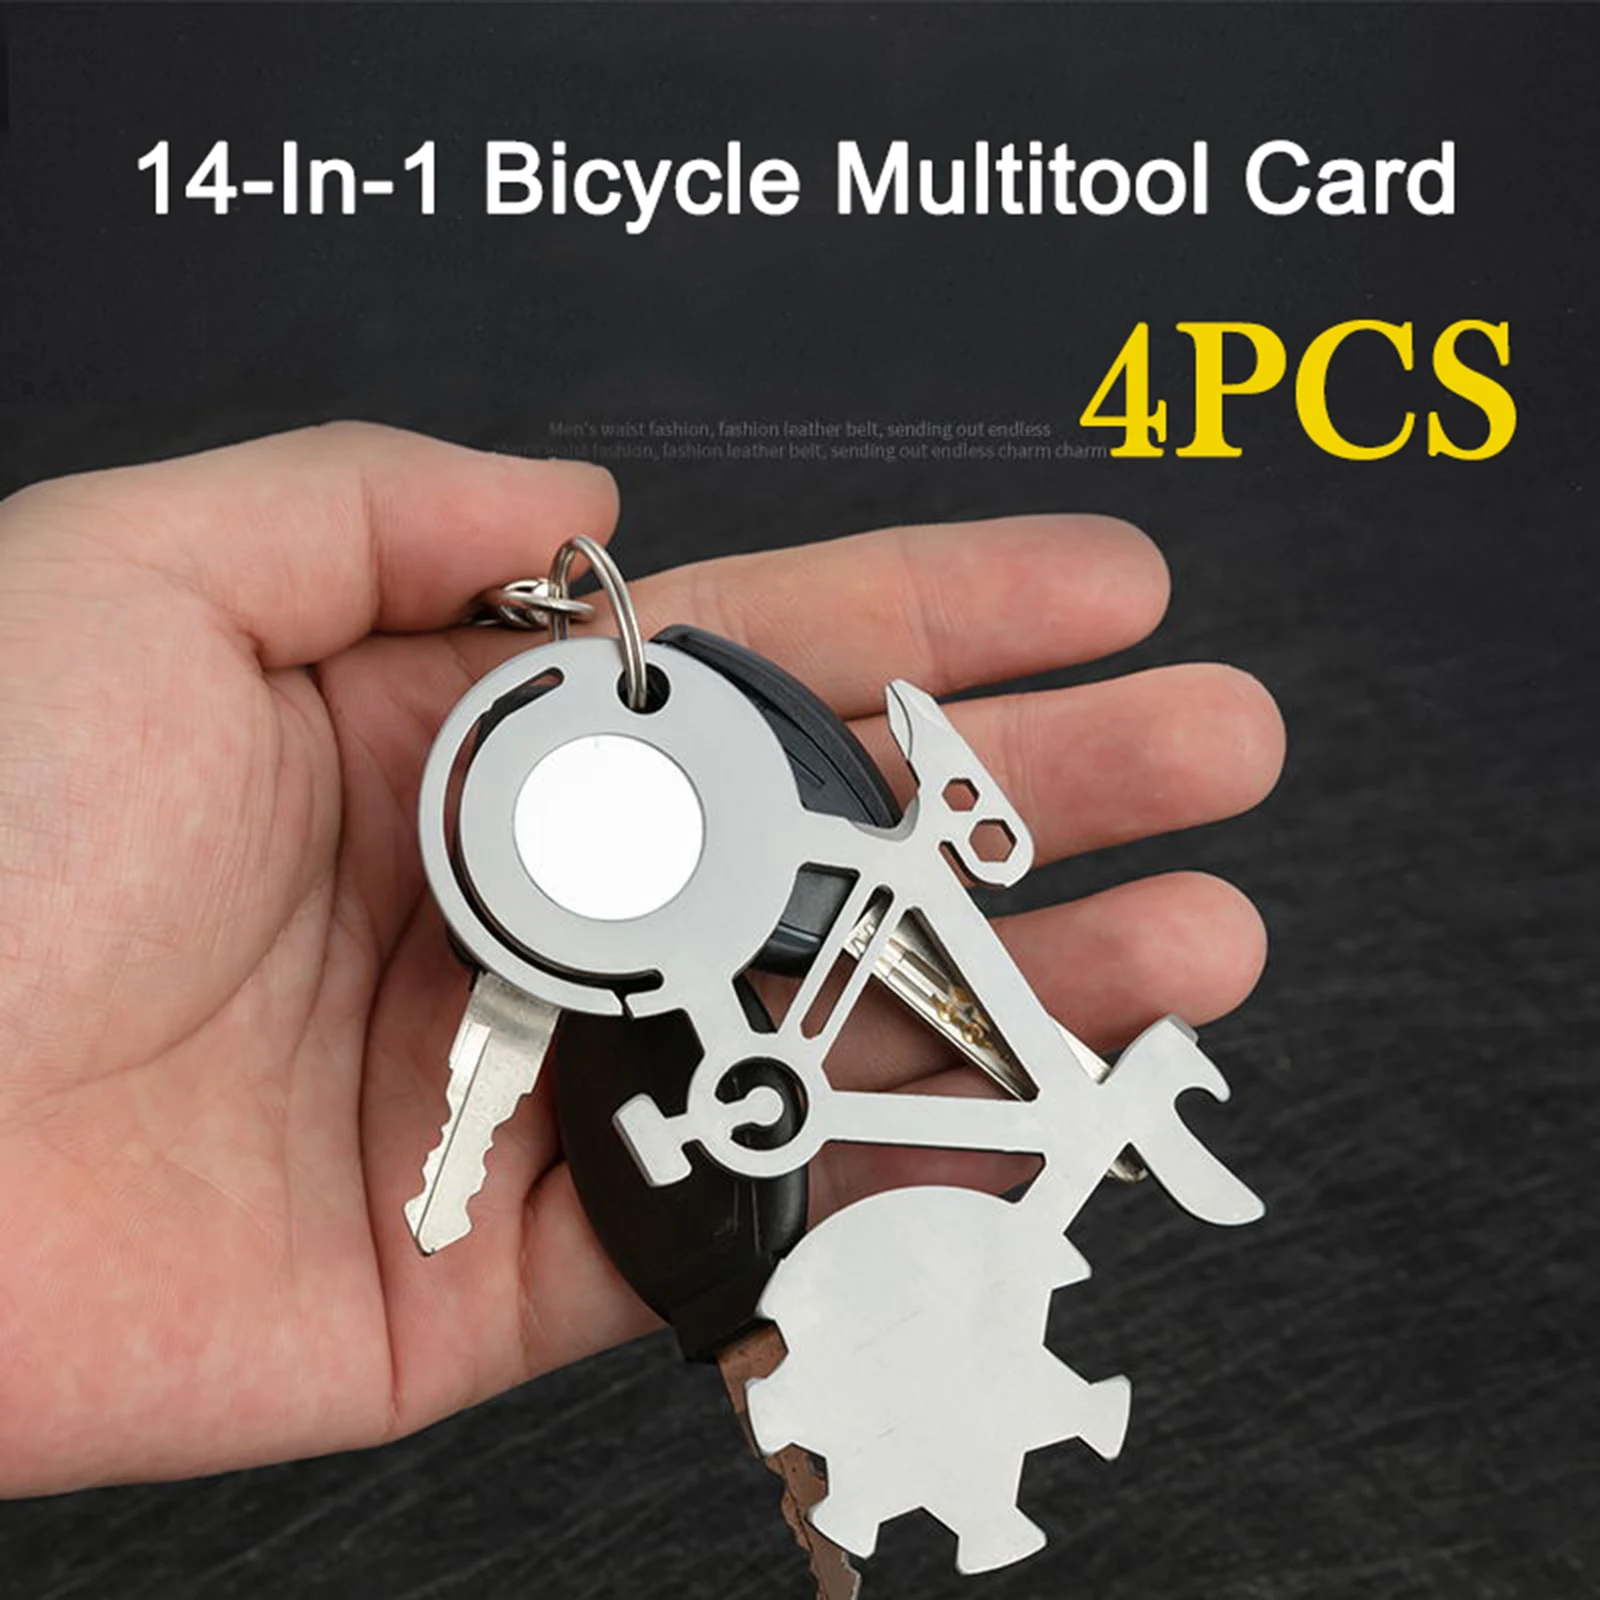 

4PCS 14-In-1 Bicycle Multitool Card 100*55mm Silver Stainless Steel Keychain Portable Tool Card Perfect Gift For Bike Lovers